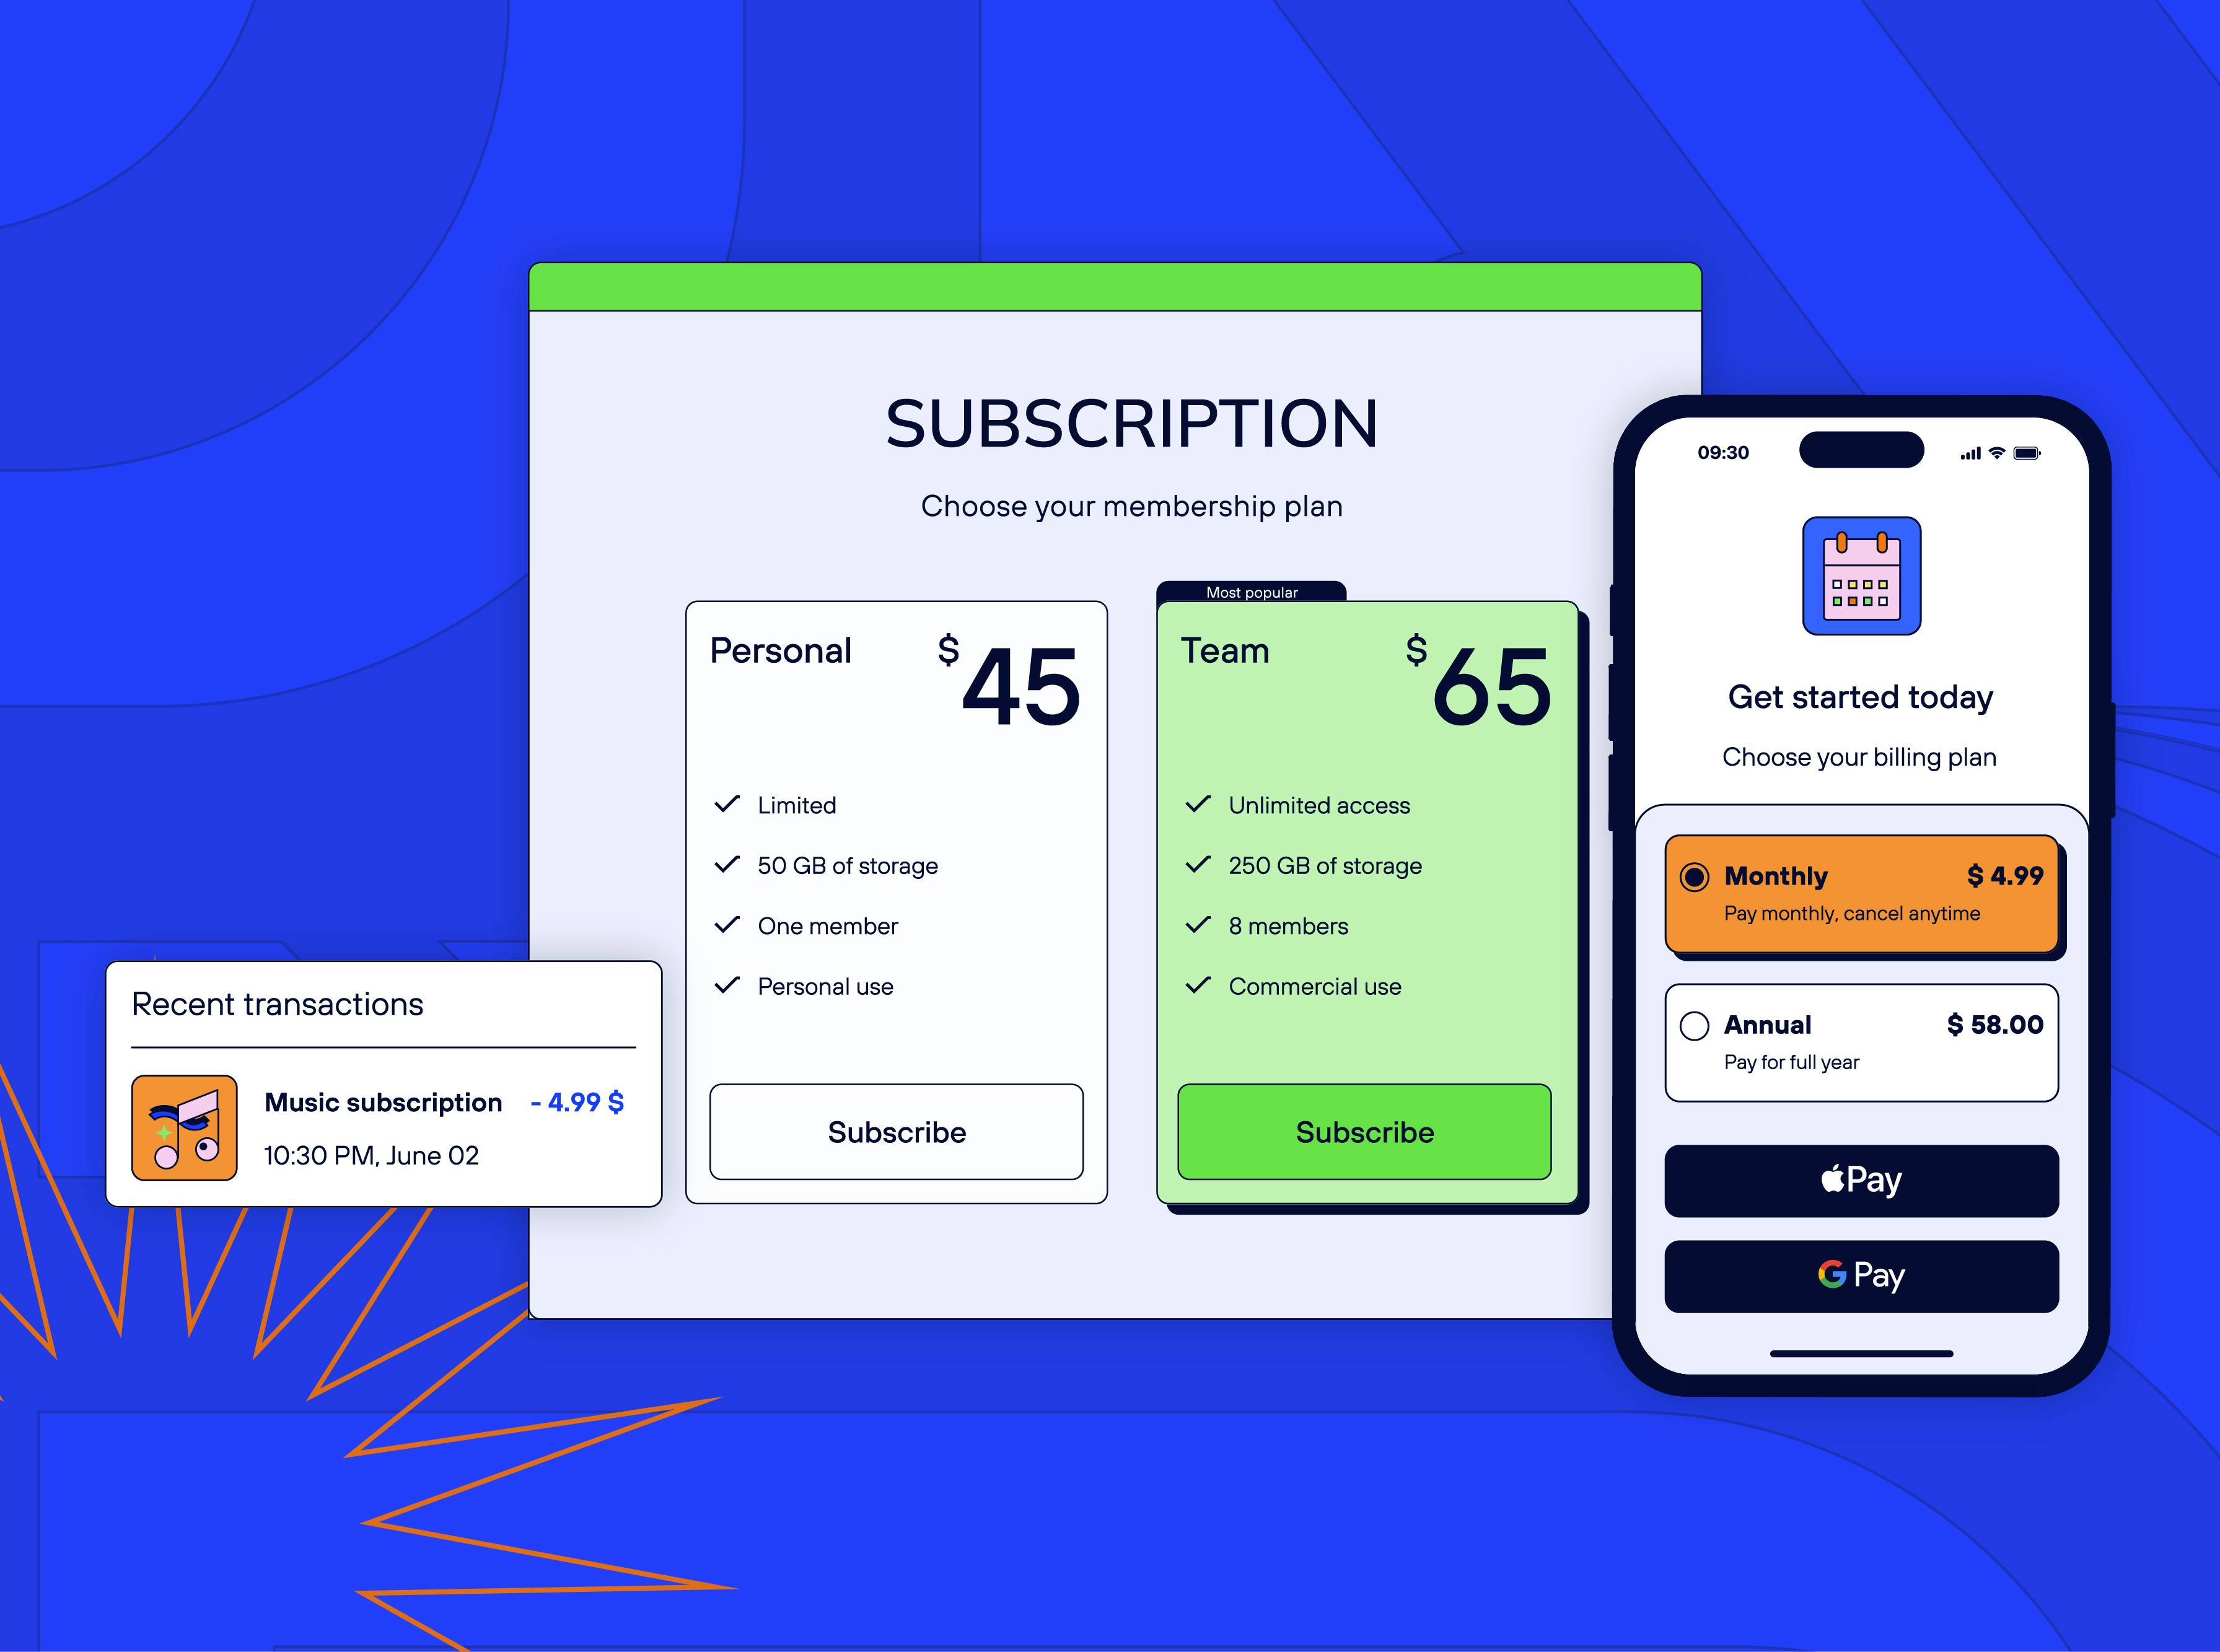 New opportunities for subscription-based services